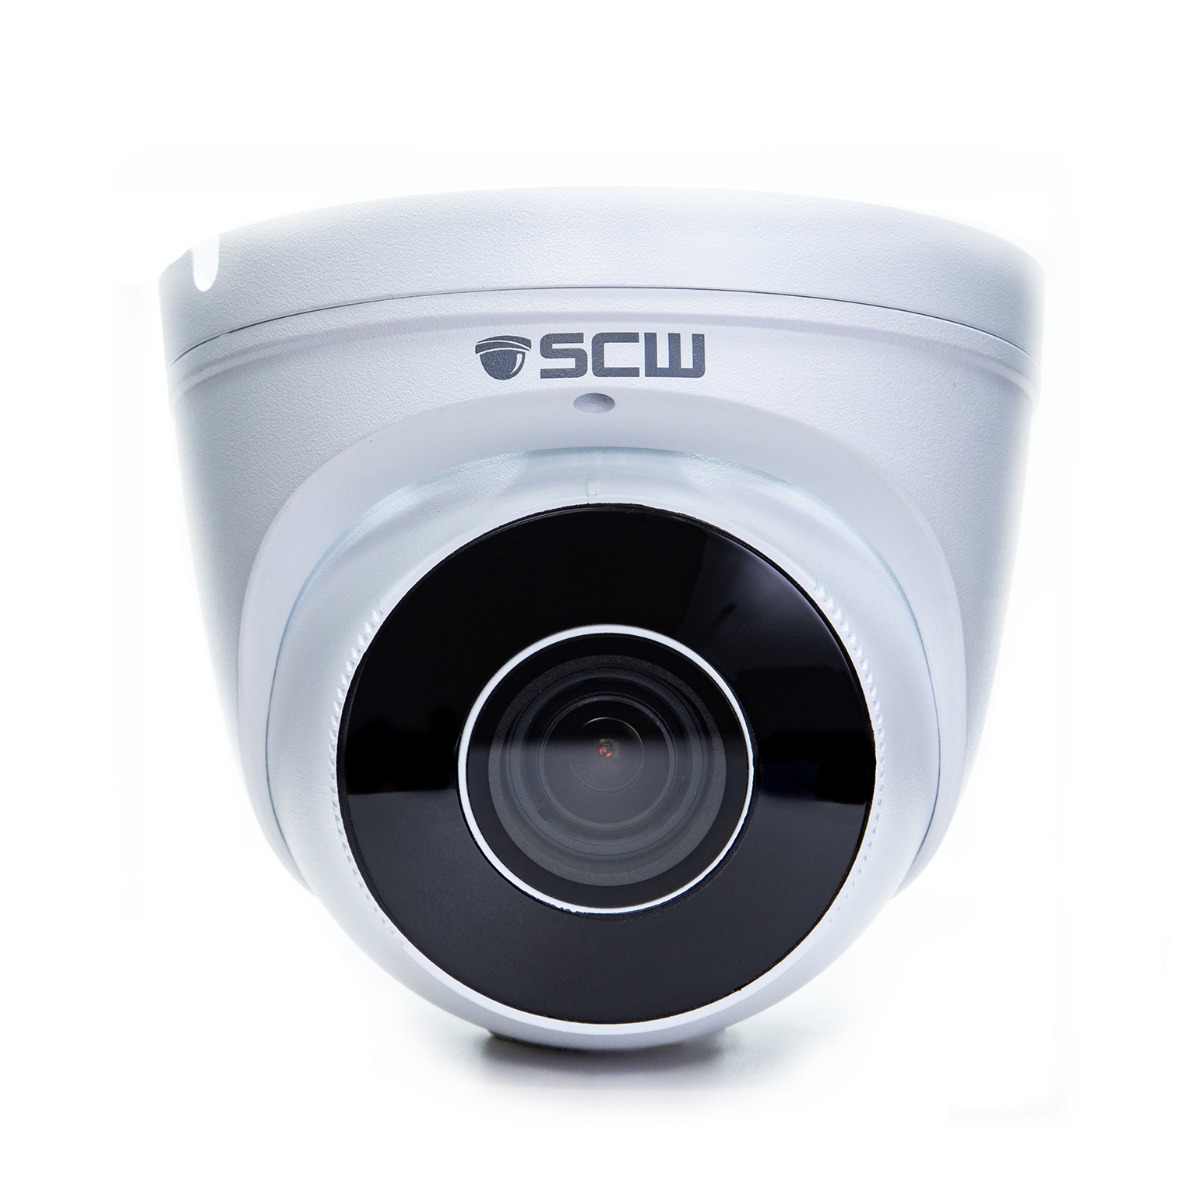 The Detective 8.0 - 26DV8M-A - 8MP (4x1080P) Multi-Purpose Lens Turret Dome Camera with Motorized Zoom and Focus and Audio Microphone